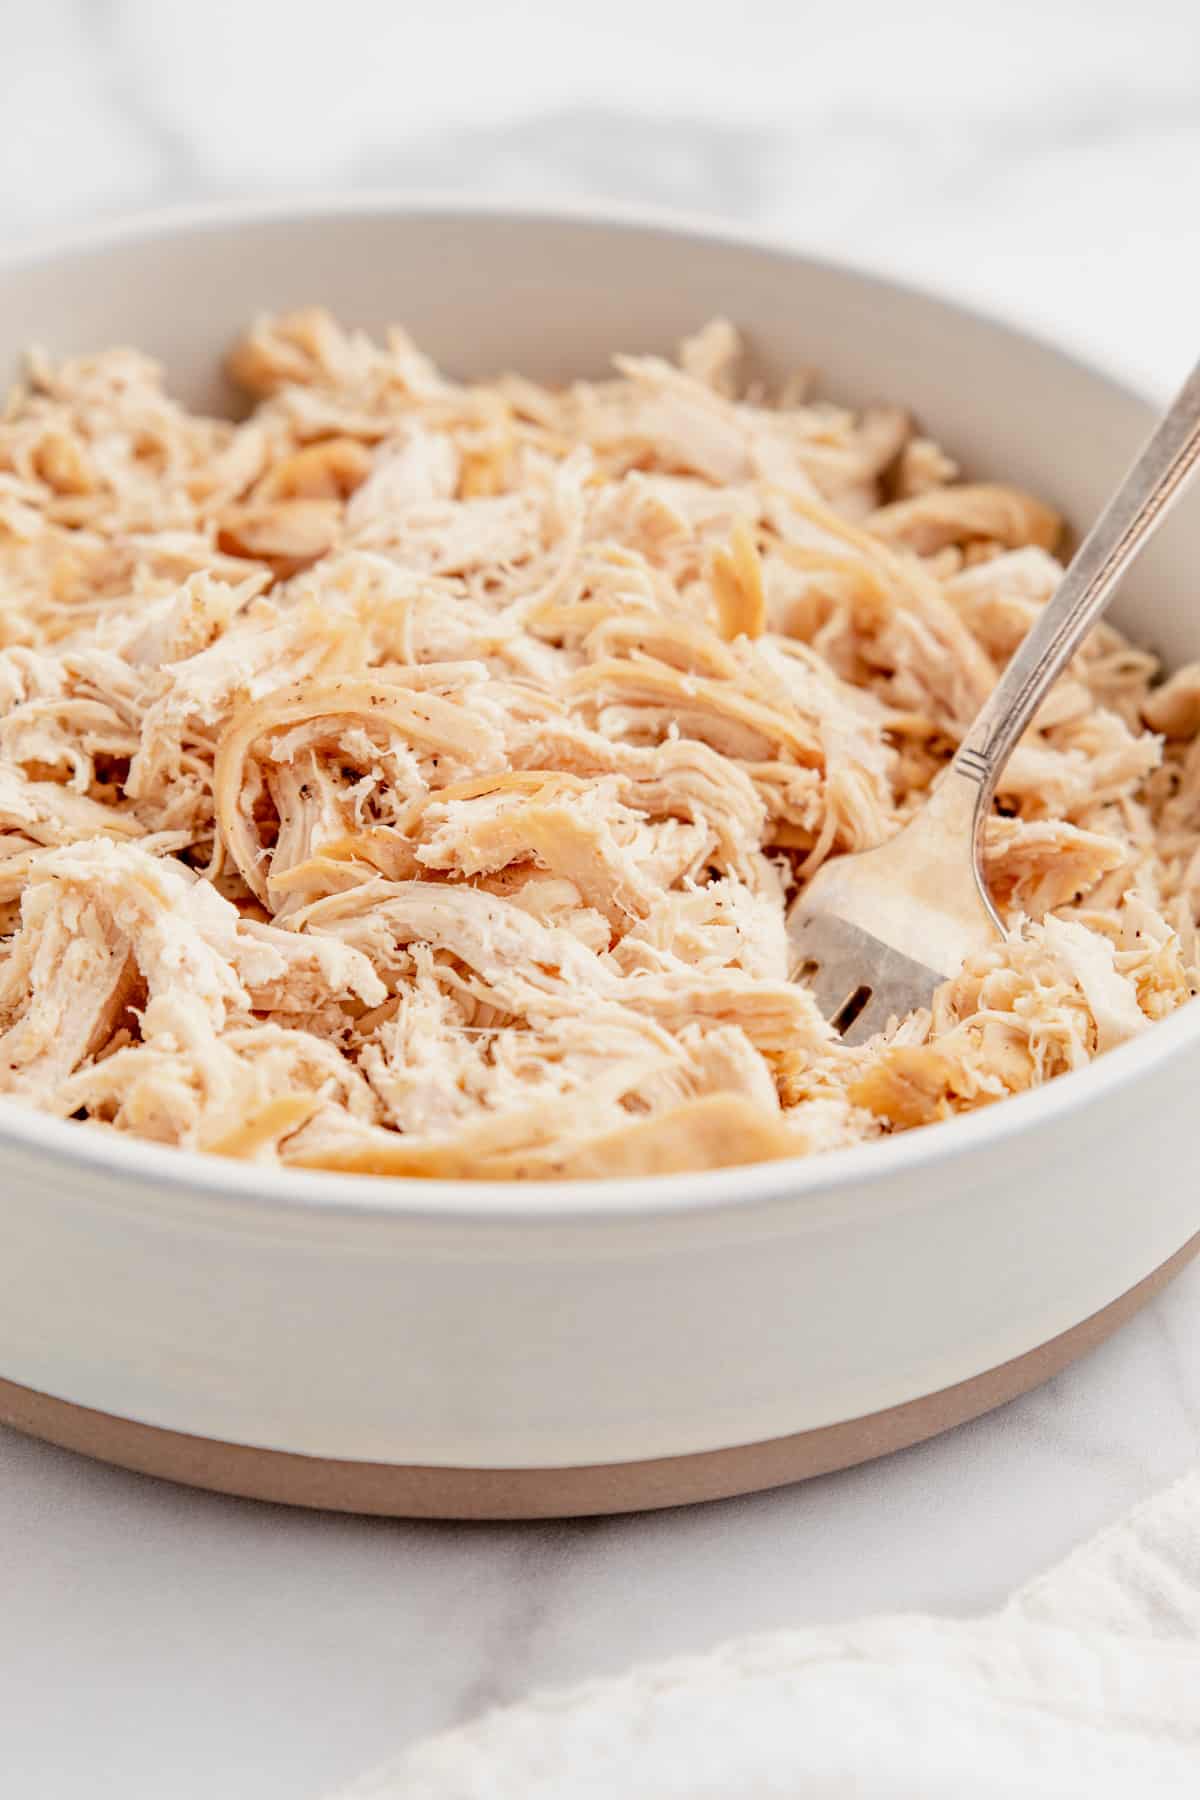 Pulled chicken in a bowl with a fork.